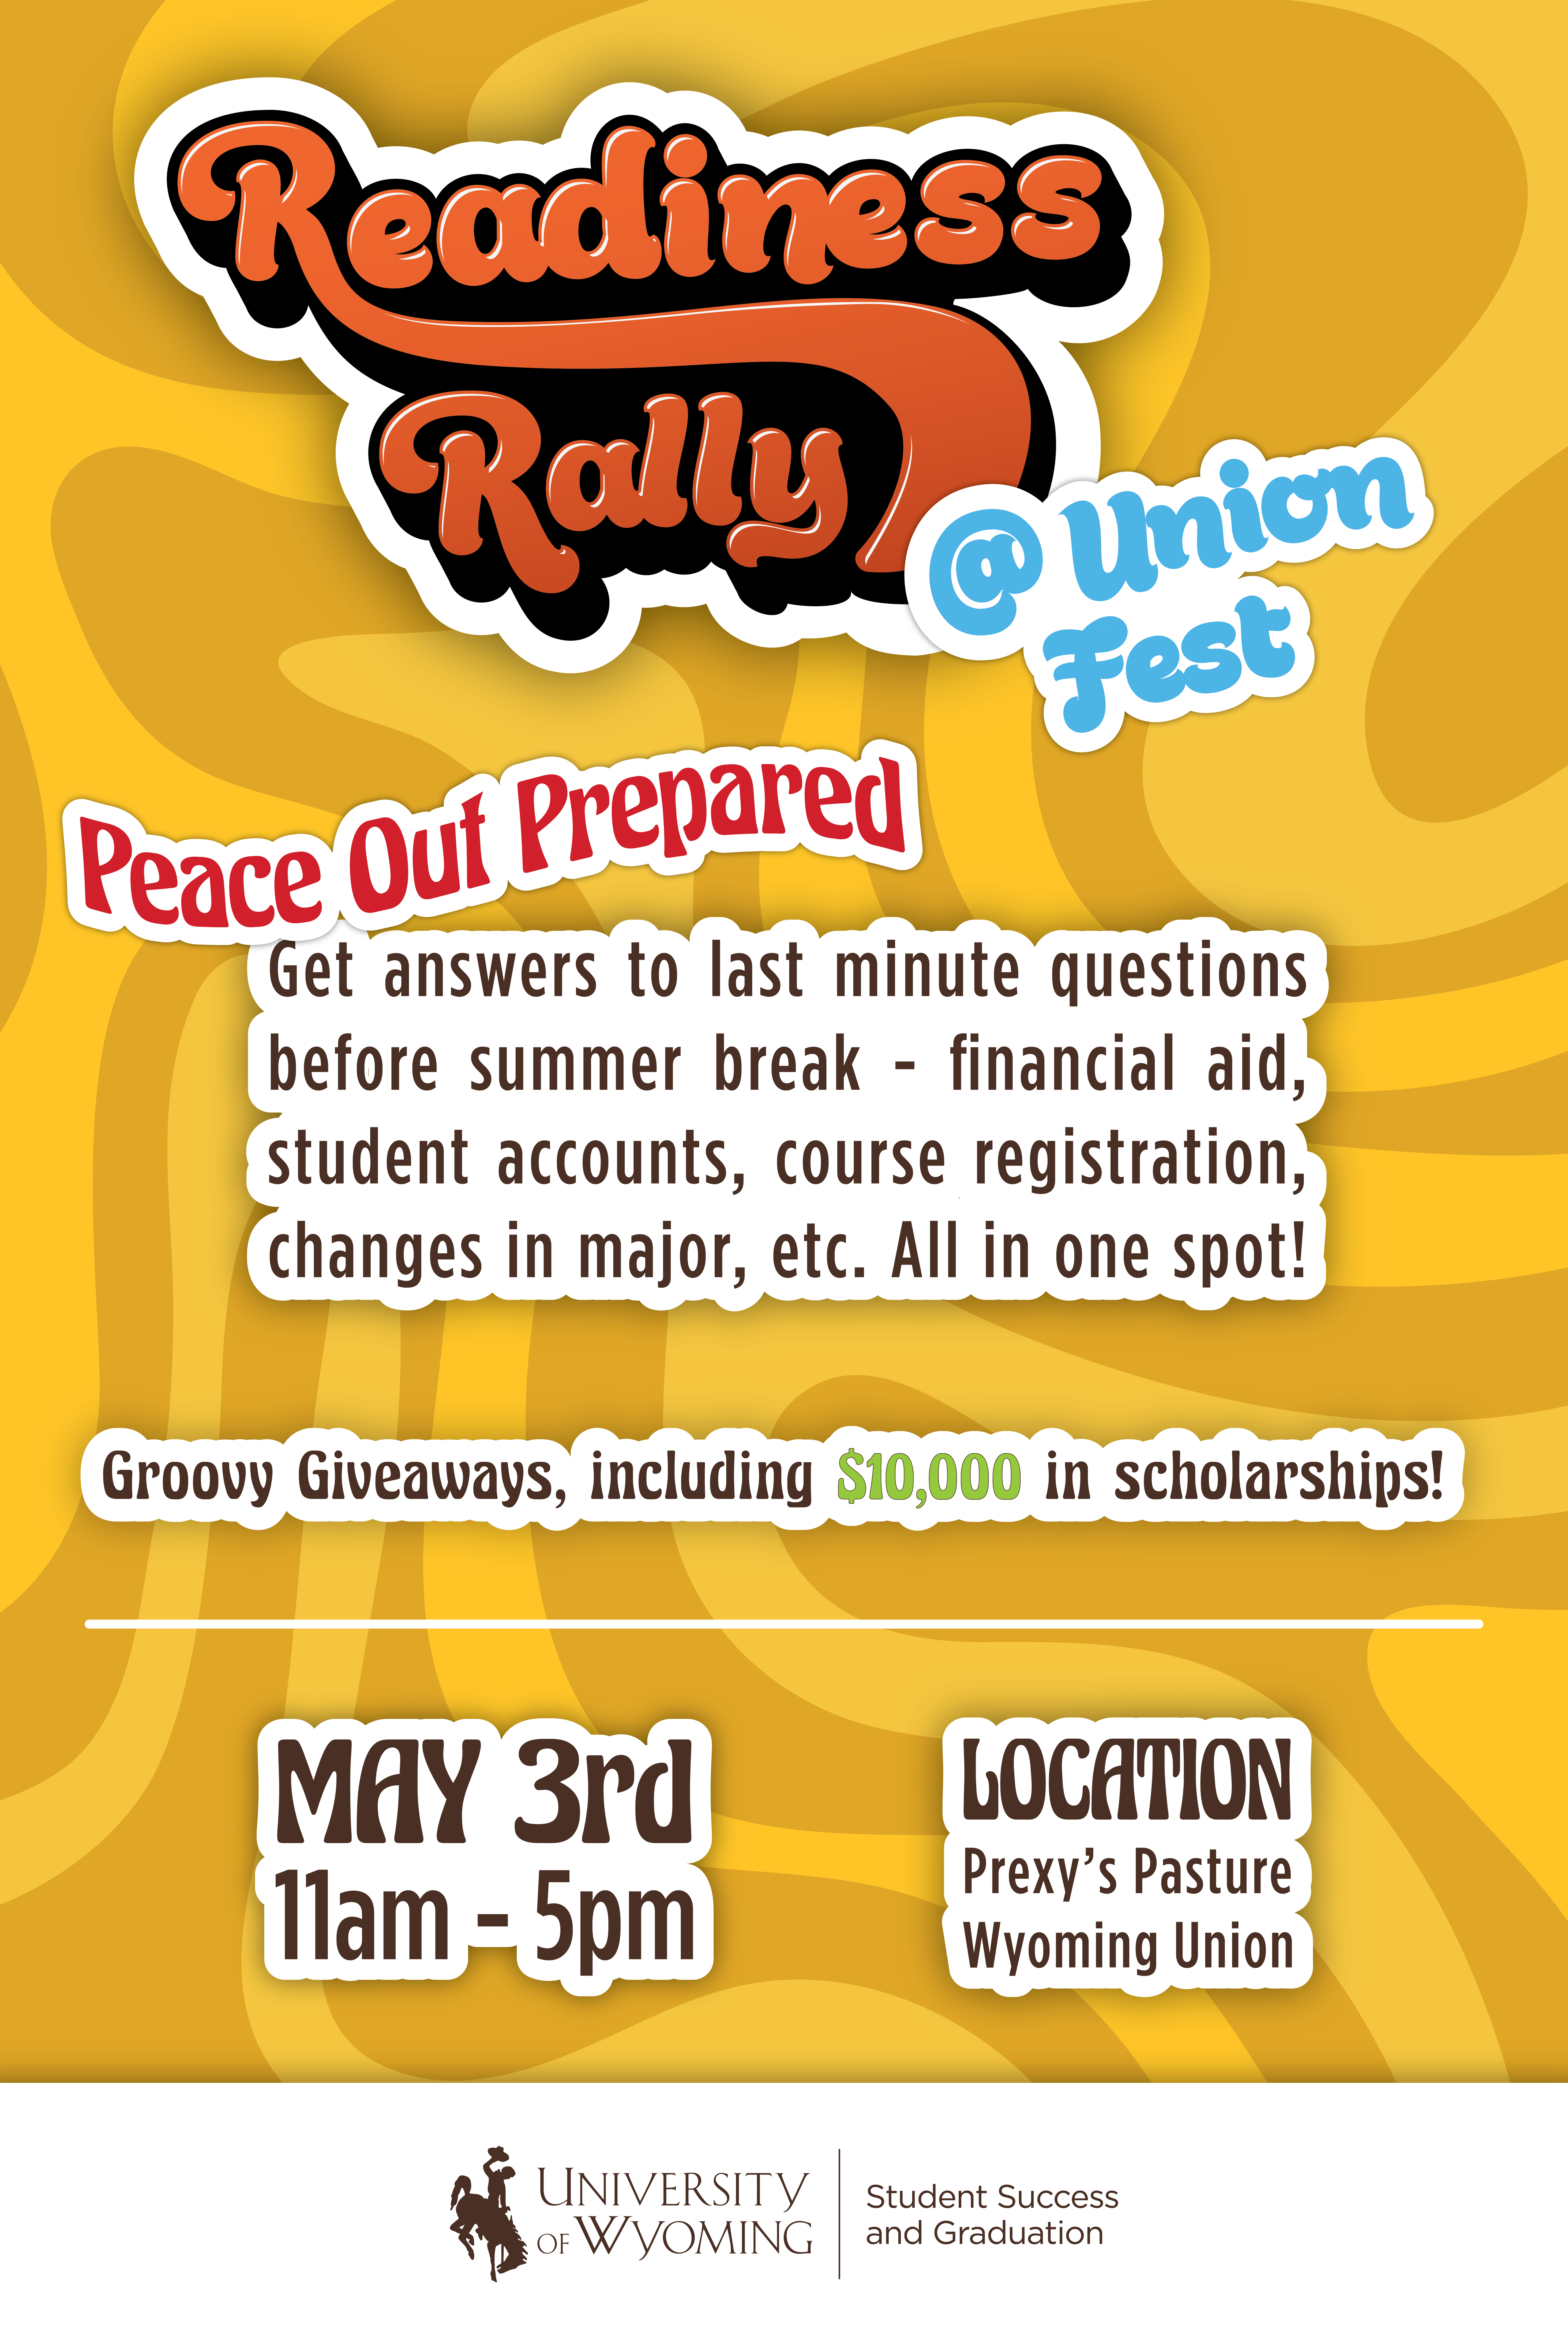 Readinesss Rally Event Flyer